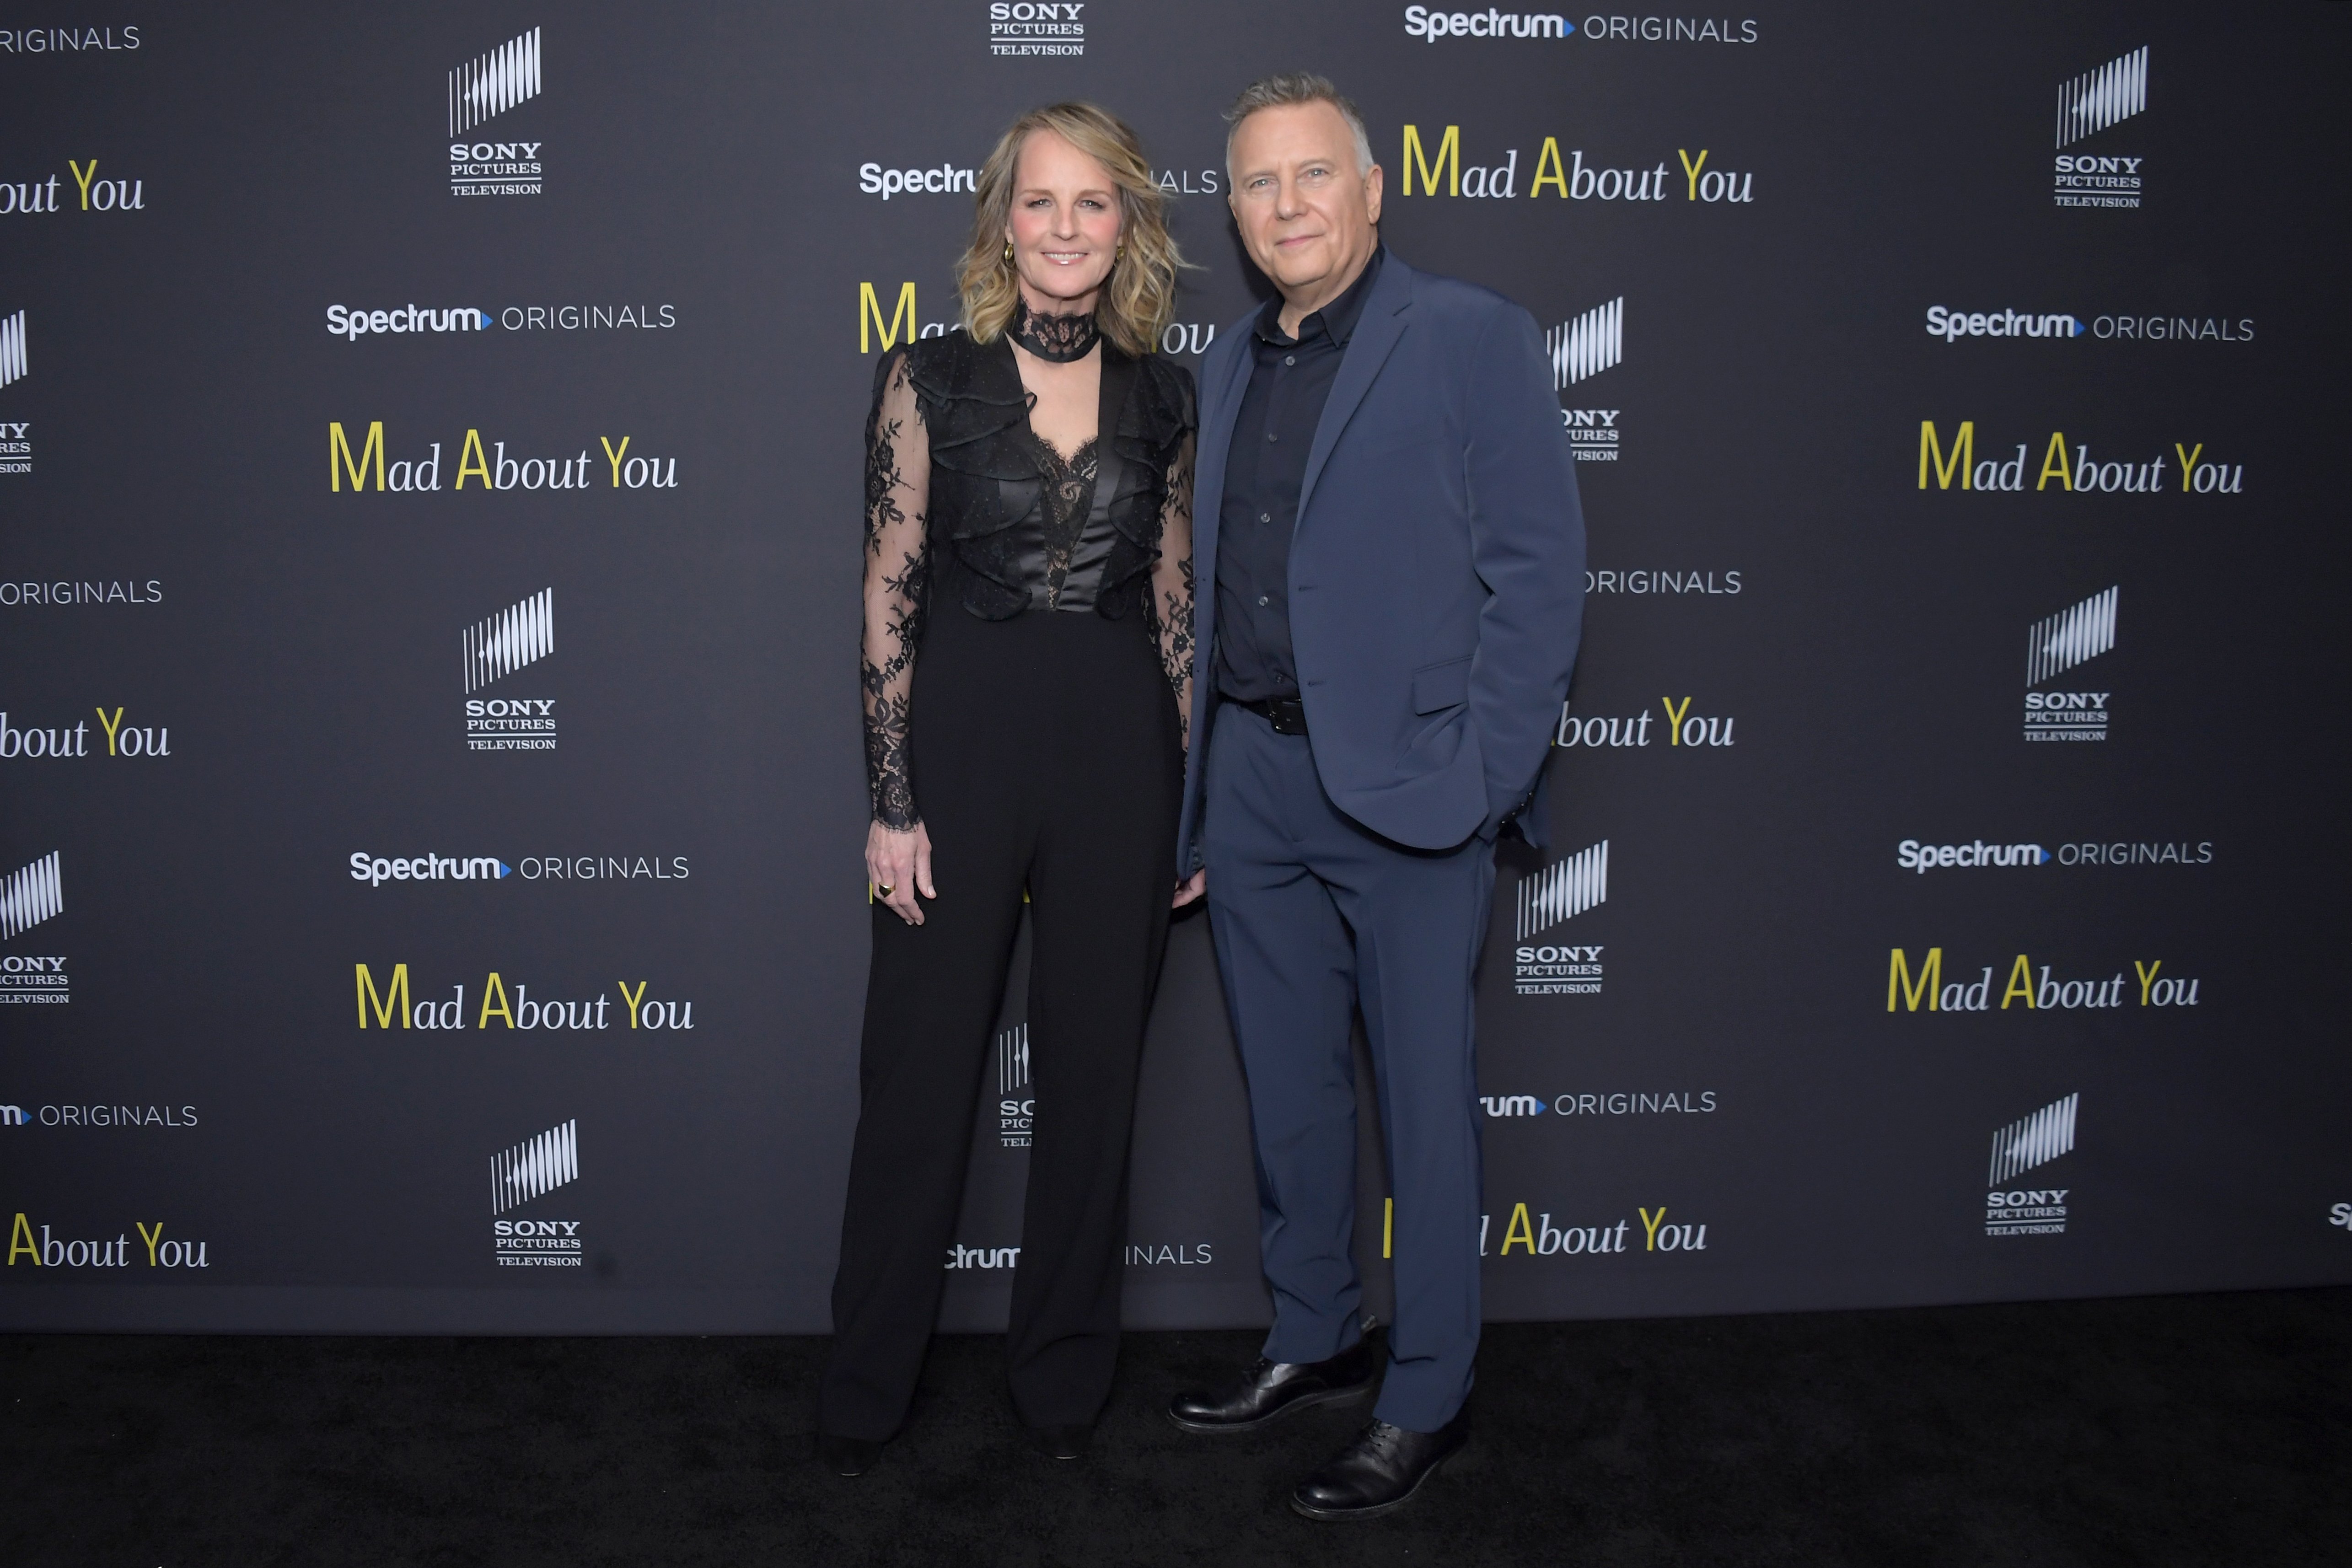 Helen Hunt and Paul Reiser attend the "Mad About You" red carpet event at The Rainbow Room on December 16, 2019, in New York City. | Source: Getty Images.